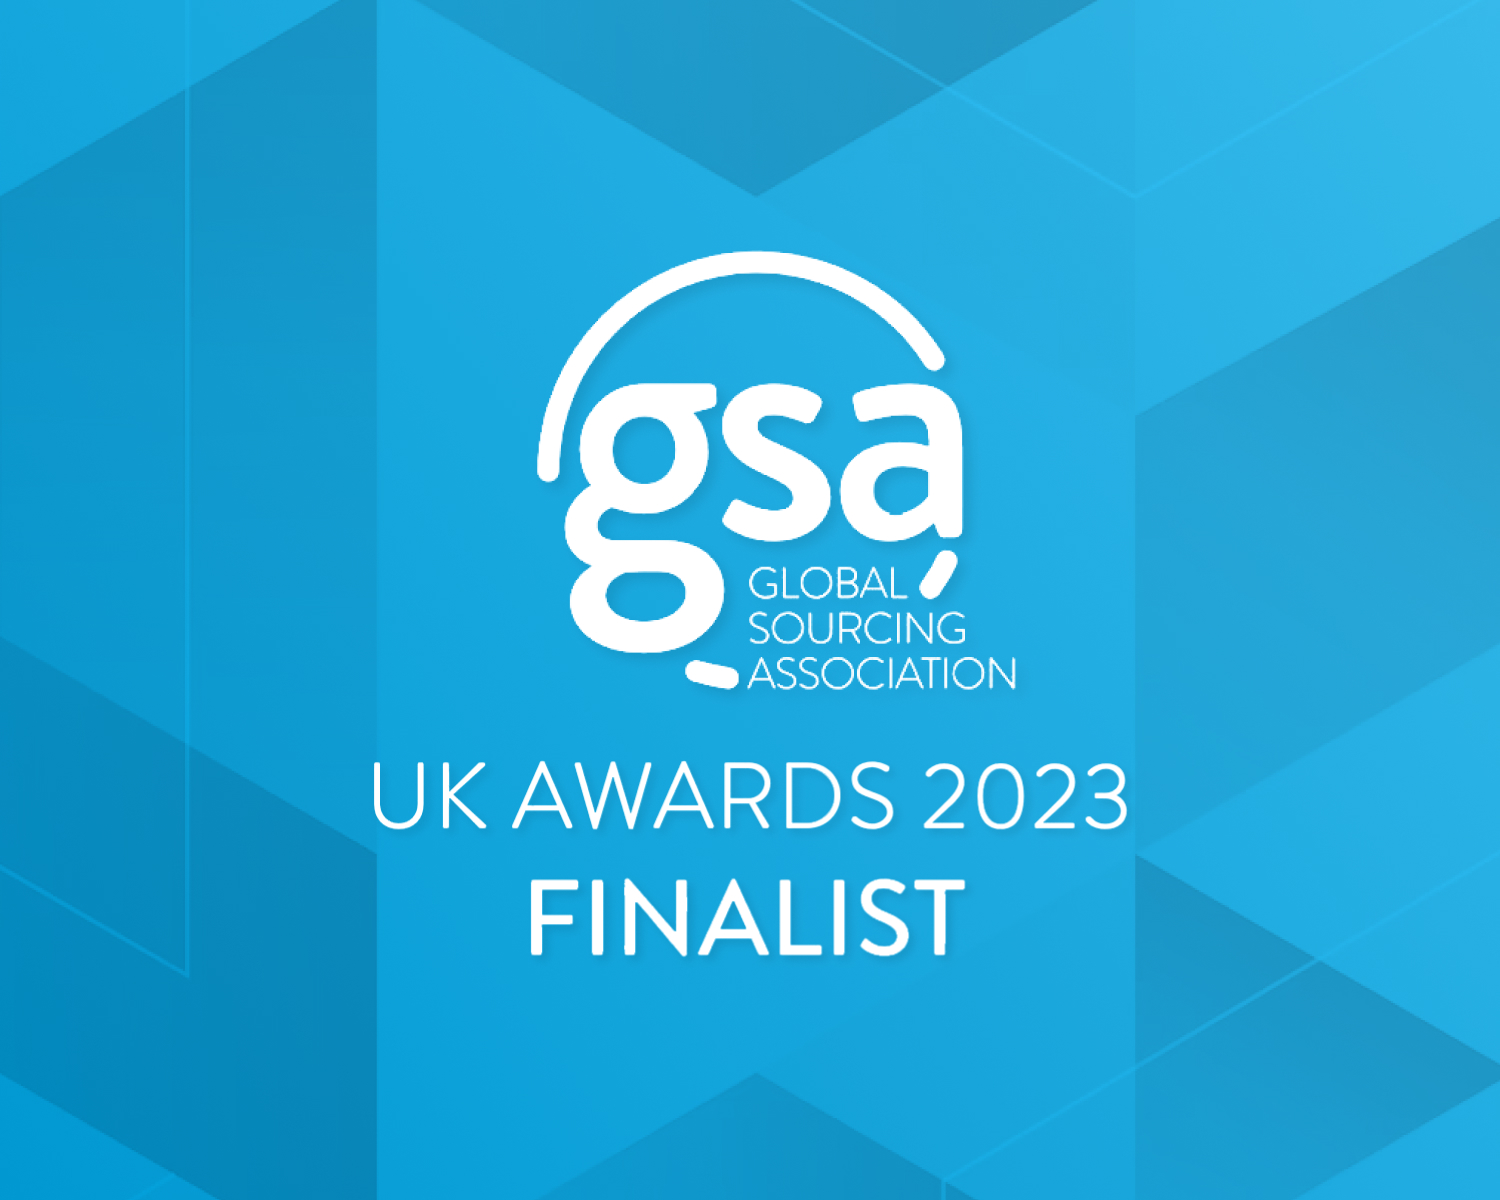 The Global Sourcing Association Recognizes NIX as a Finalist in the 2023 UK Awards